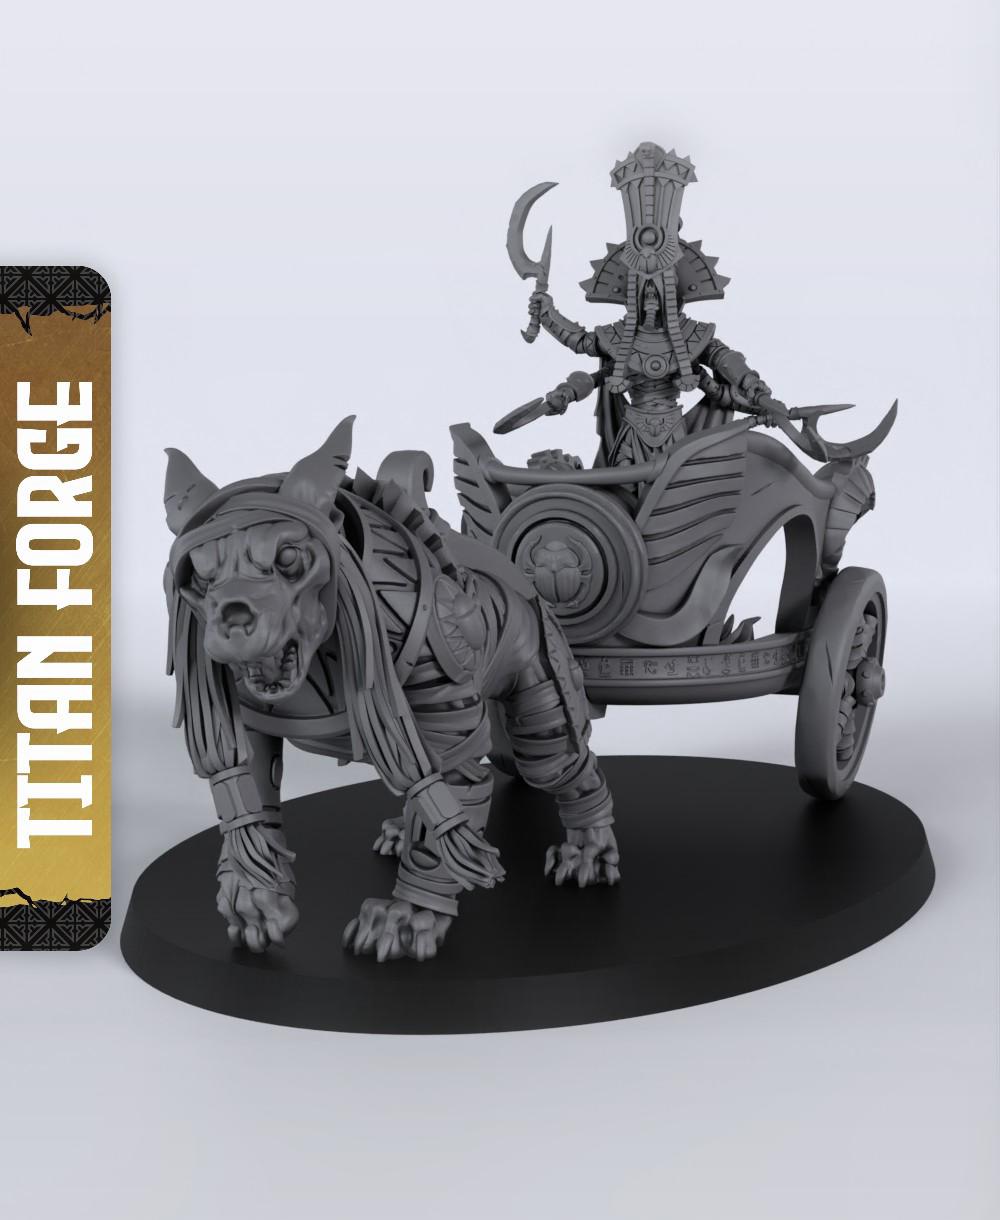 Chariot - With Free Dragon Warhammer - 5e DnD Inspired for RPG and Wargamers 3d model